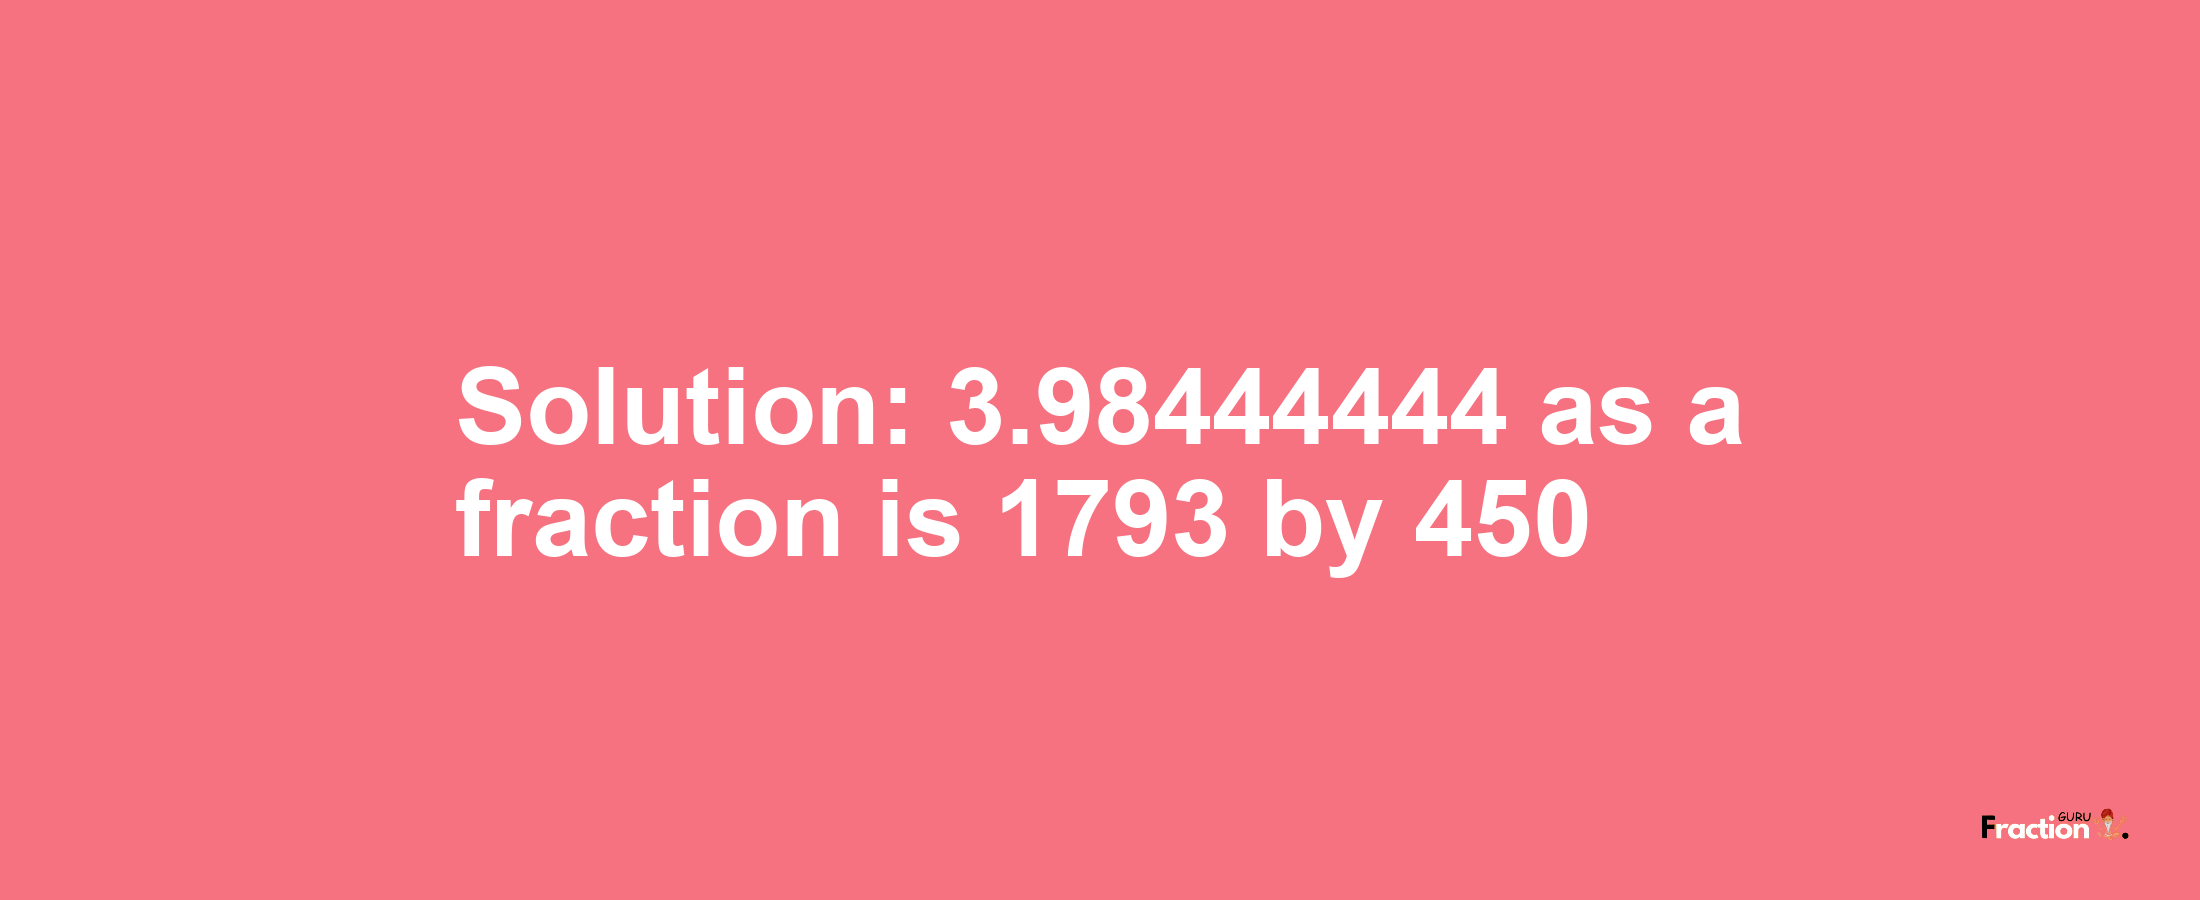 Solution:3.98444444 as a fraction is 1793/450